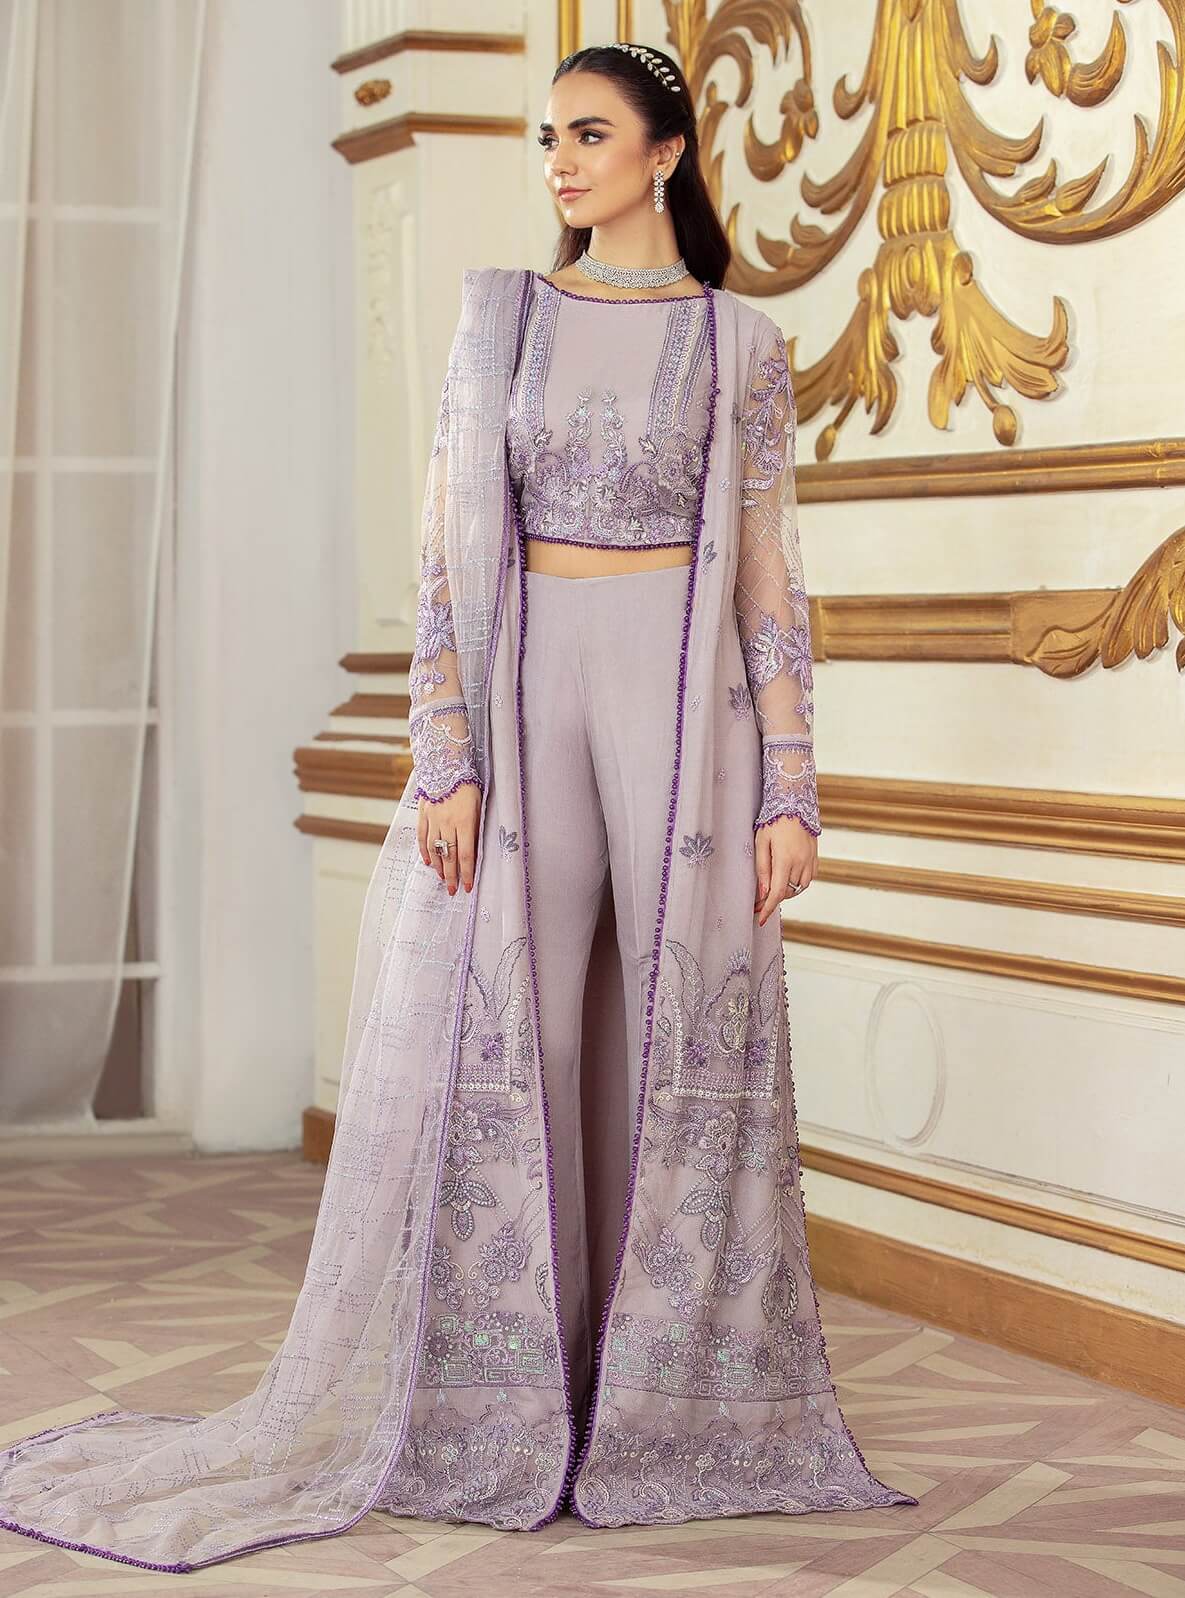 House of Nawab Gul Mira Luxury Formal Unstitched 3PC Suit 06-TANAZ